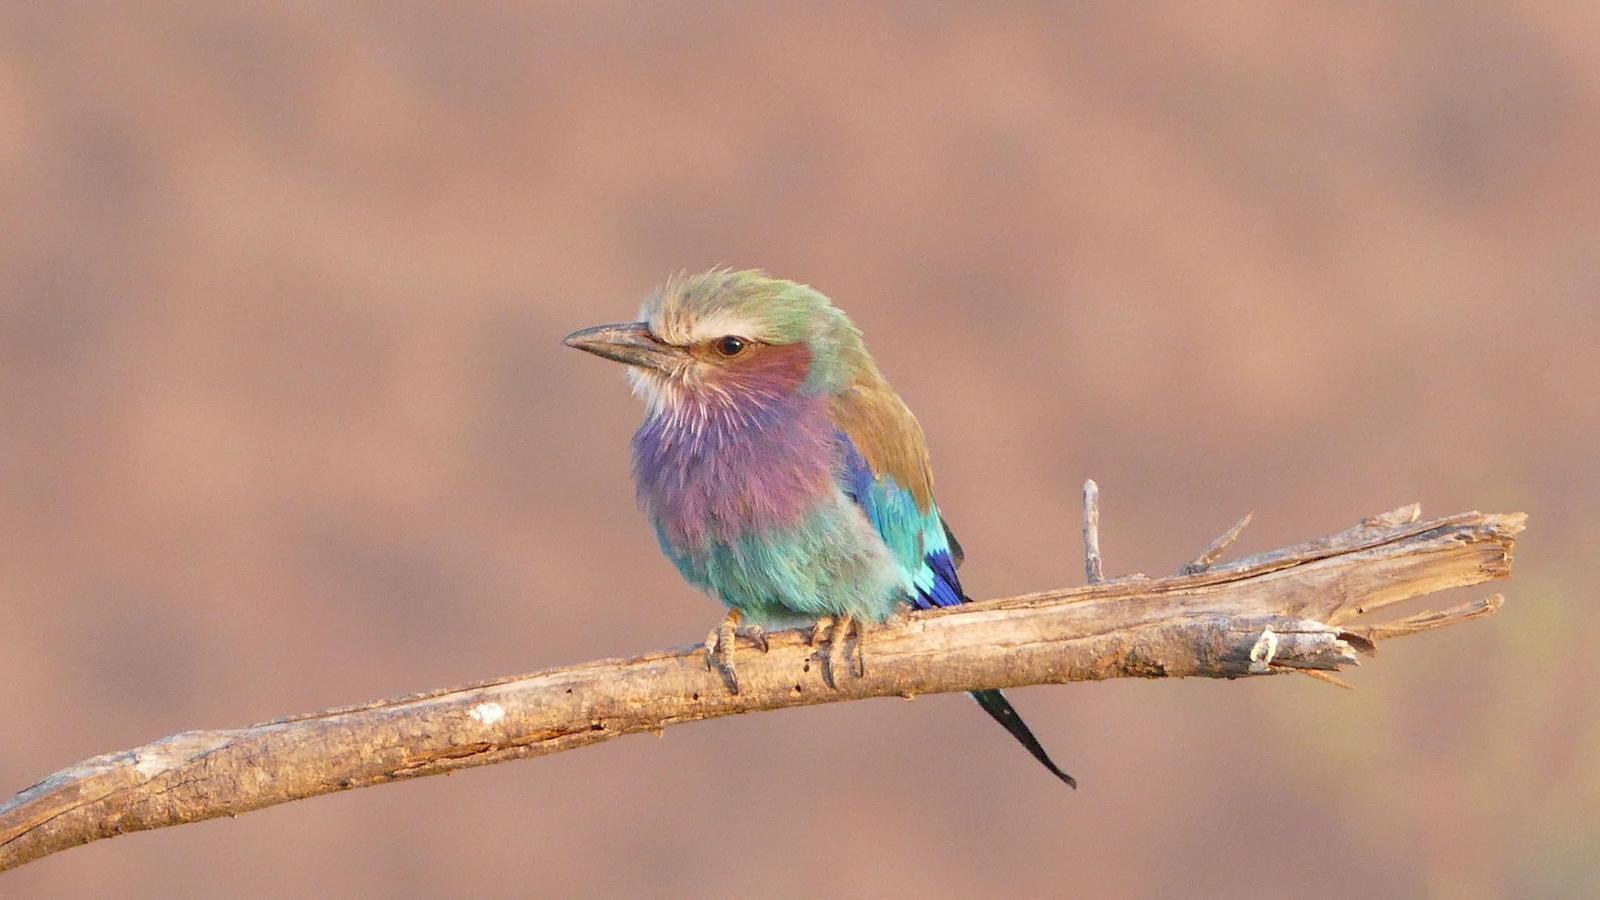 Lilac-breasted Roller Photo by Randy Siebert